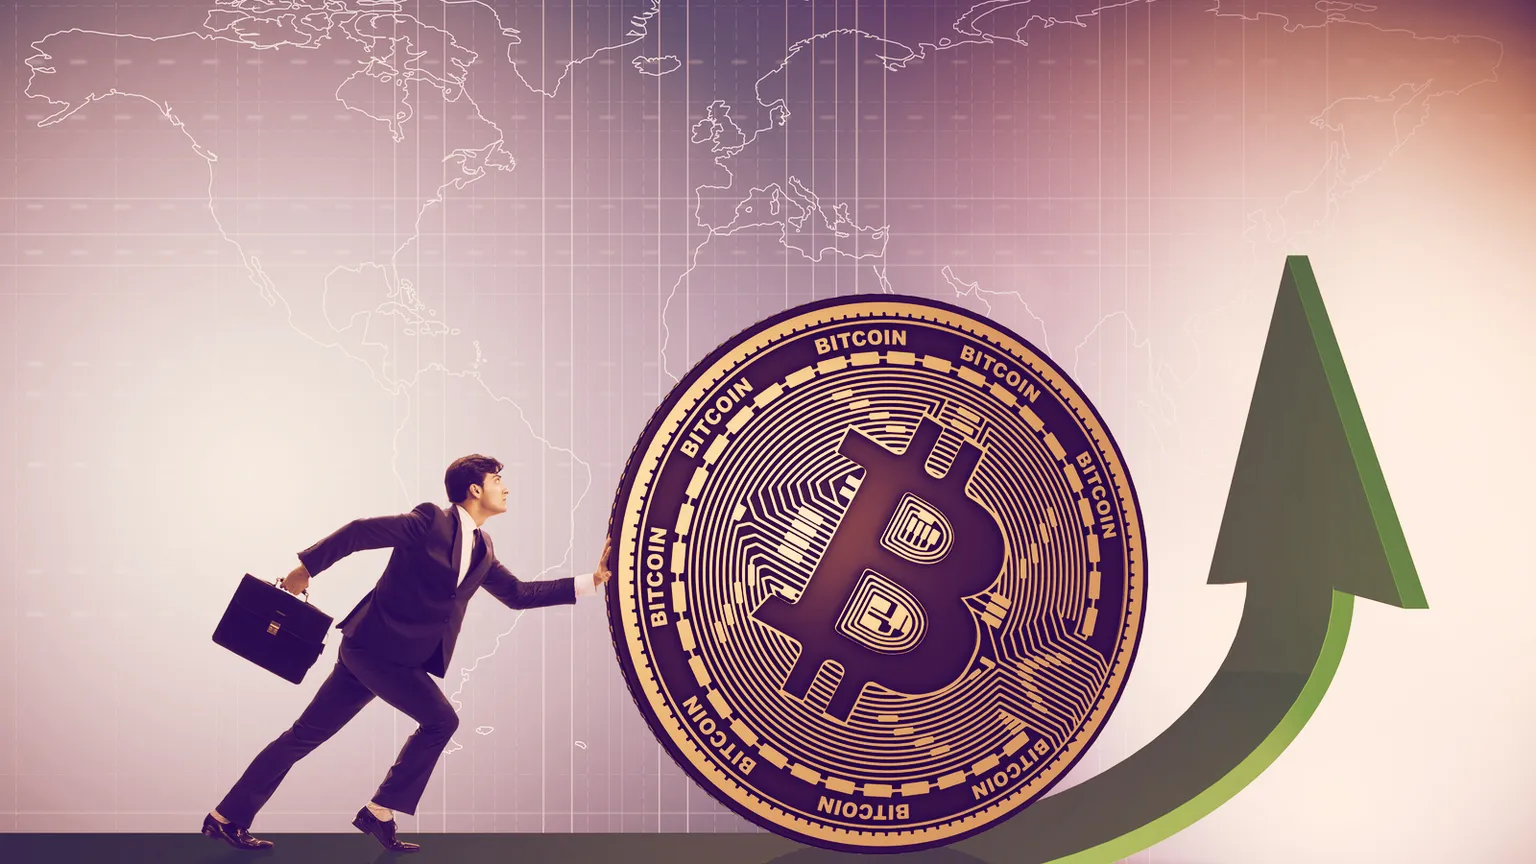 Bitcoin makes a great recovery as it pushes past $9,000. Image: Shutterstock